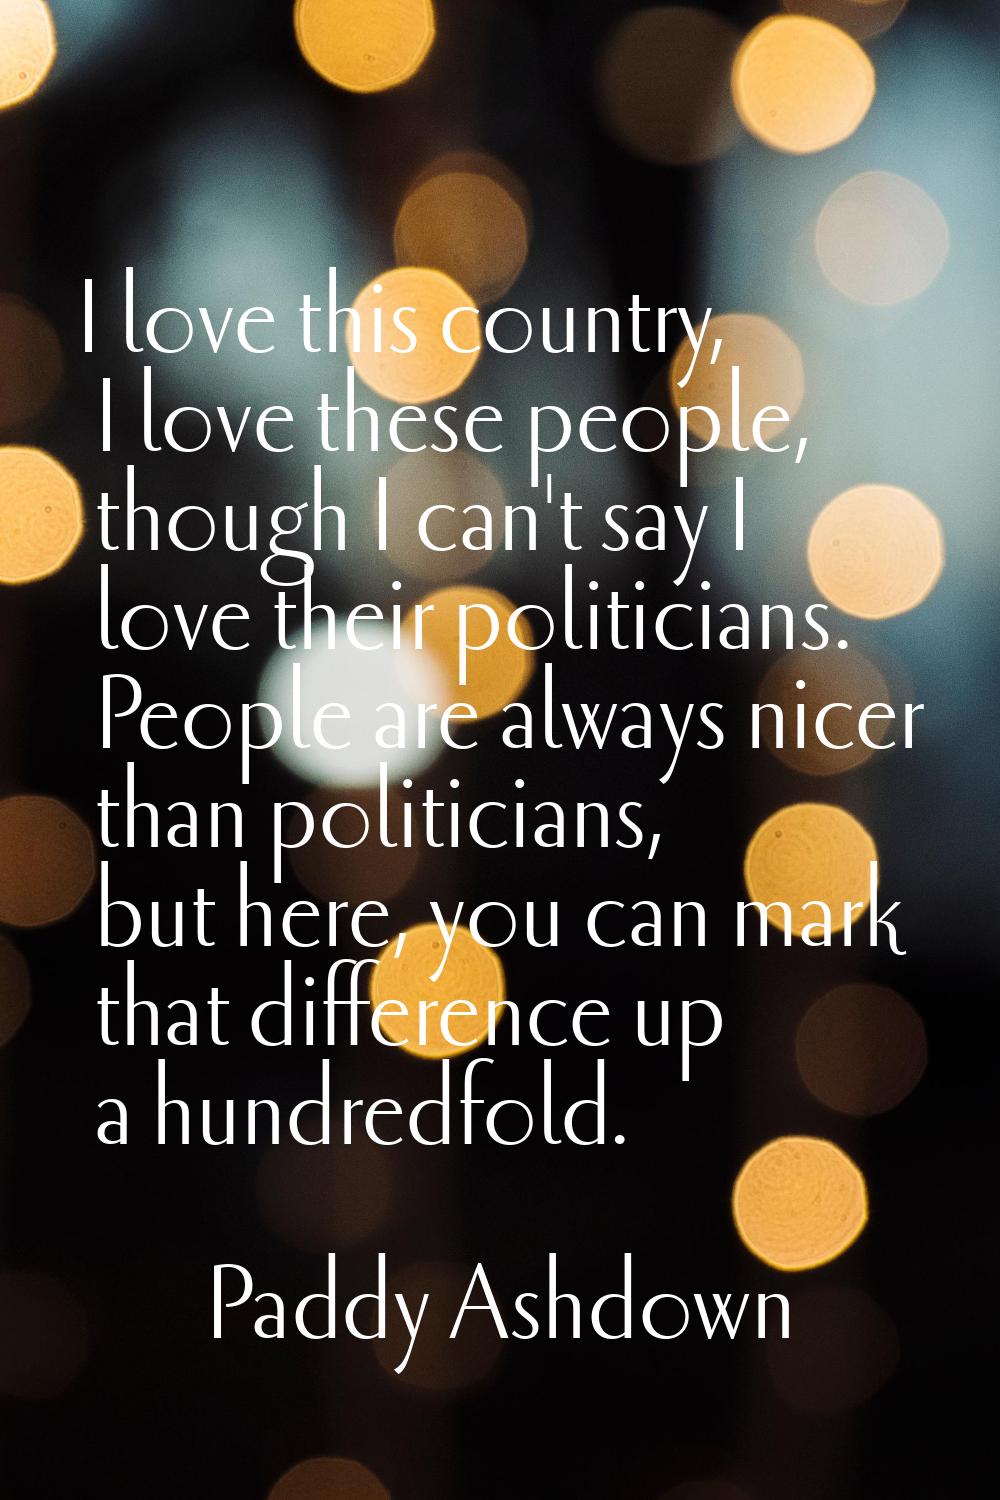 I love this country, I love these people, though I can't say I love their politicians. People are a